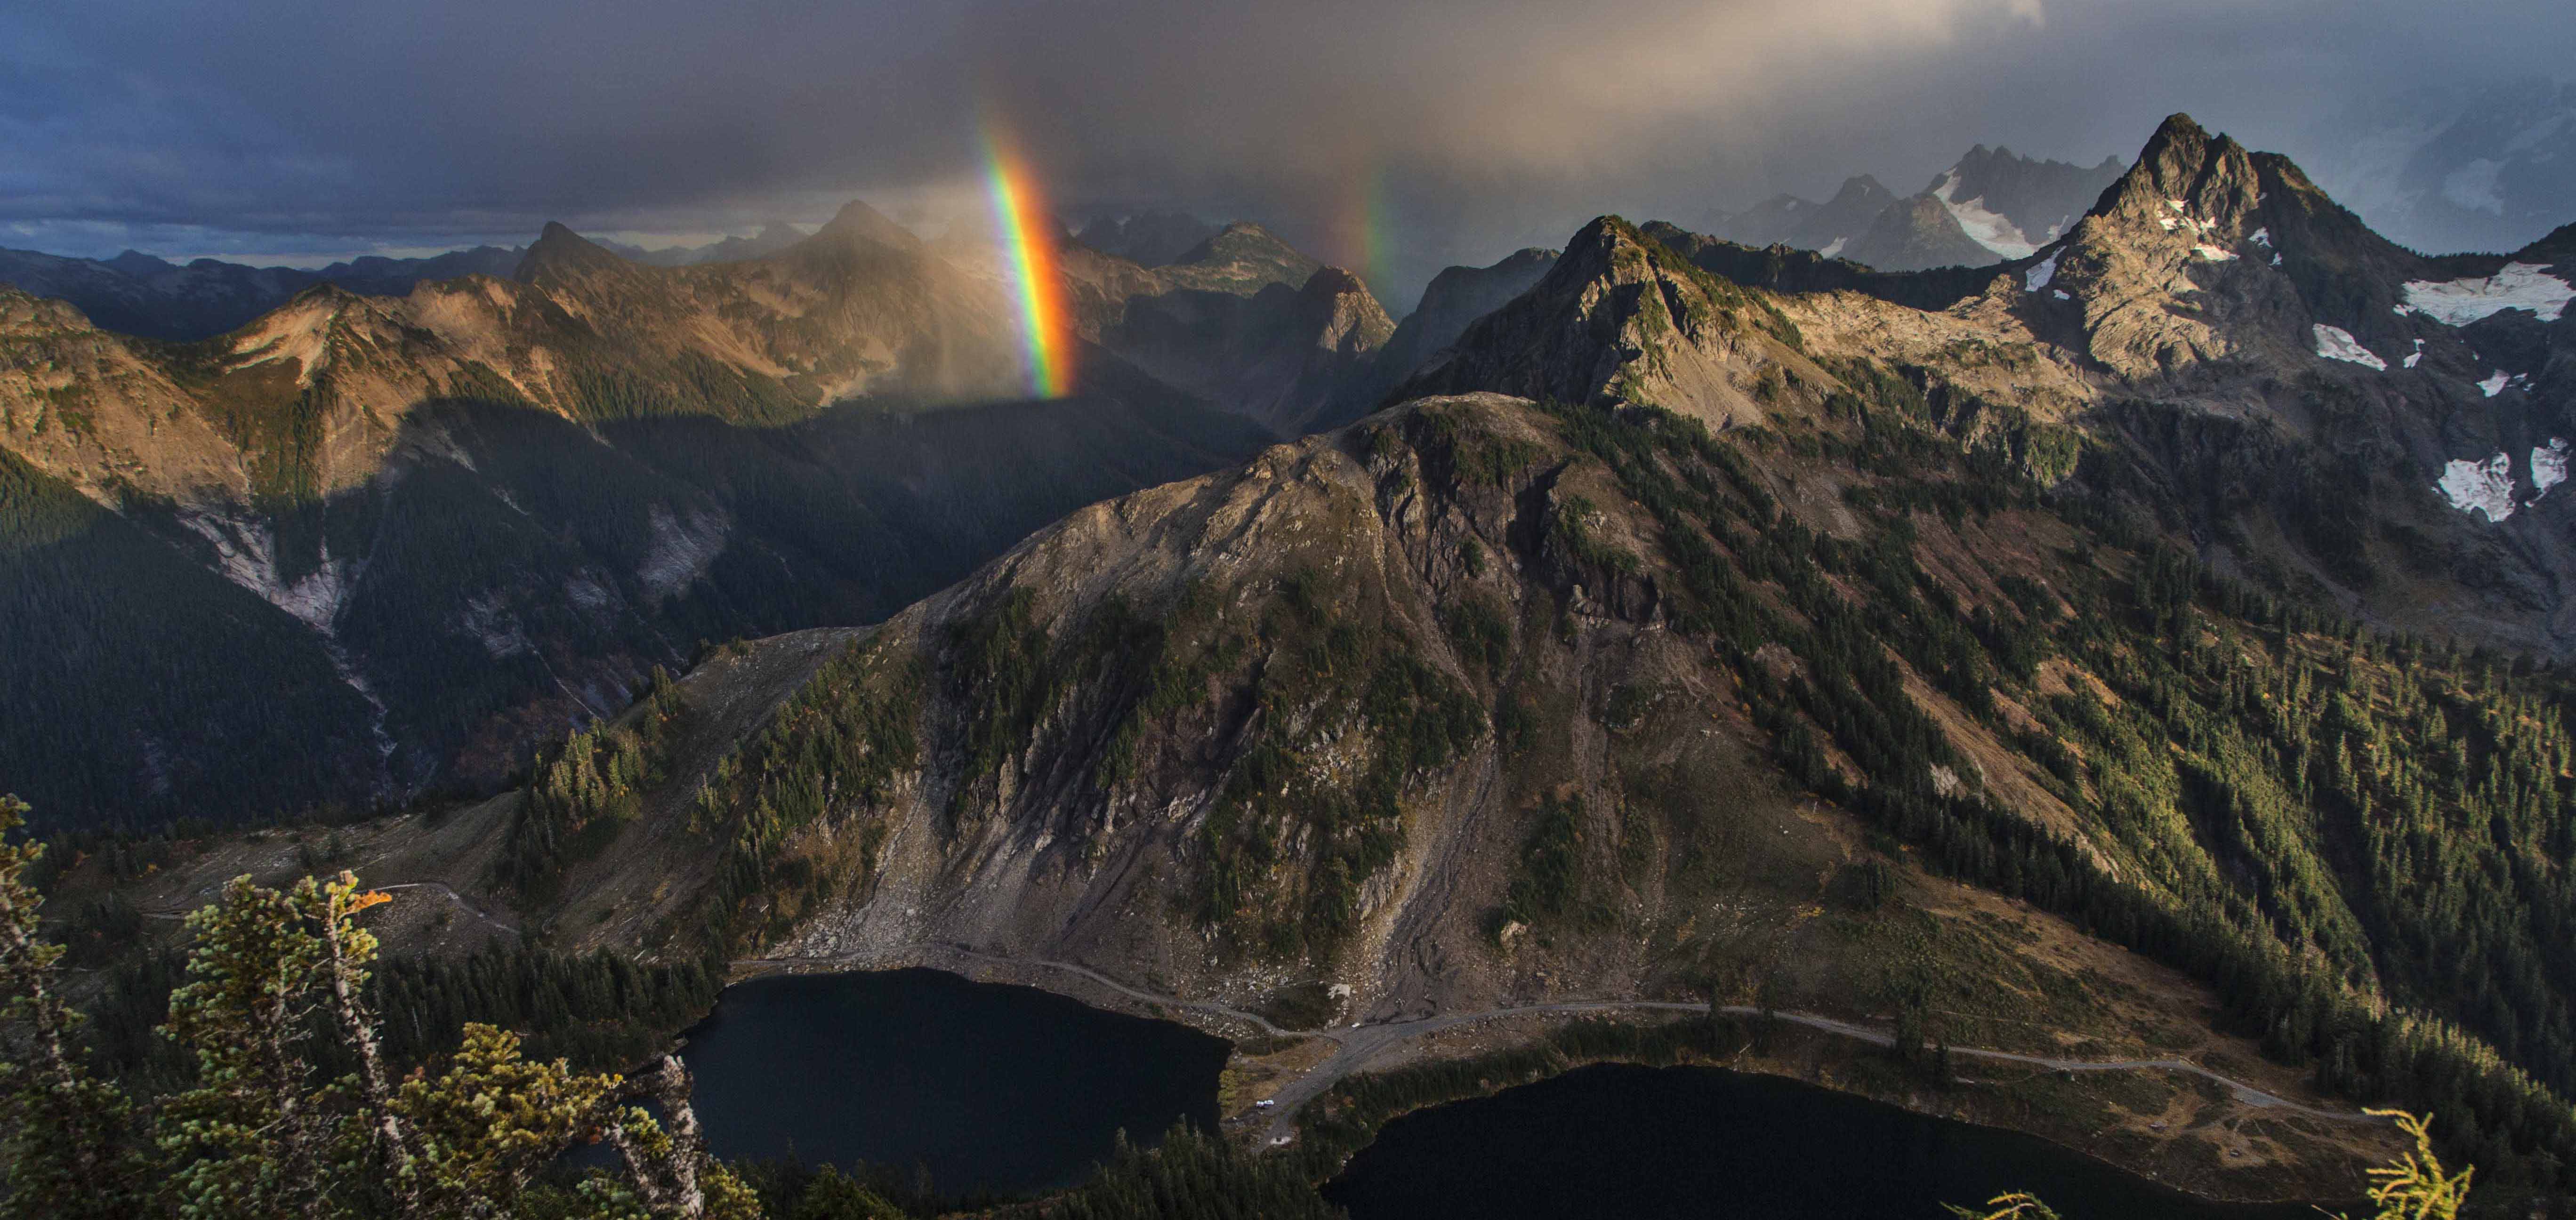 A lake rainbow disappears into jagged peaks, capped with snow. Below the peaks is a dark lake. The lake is bordered by a thin ribbon of a road.